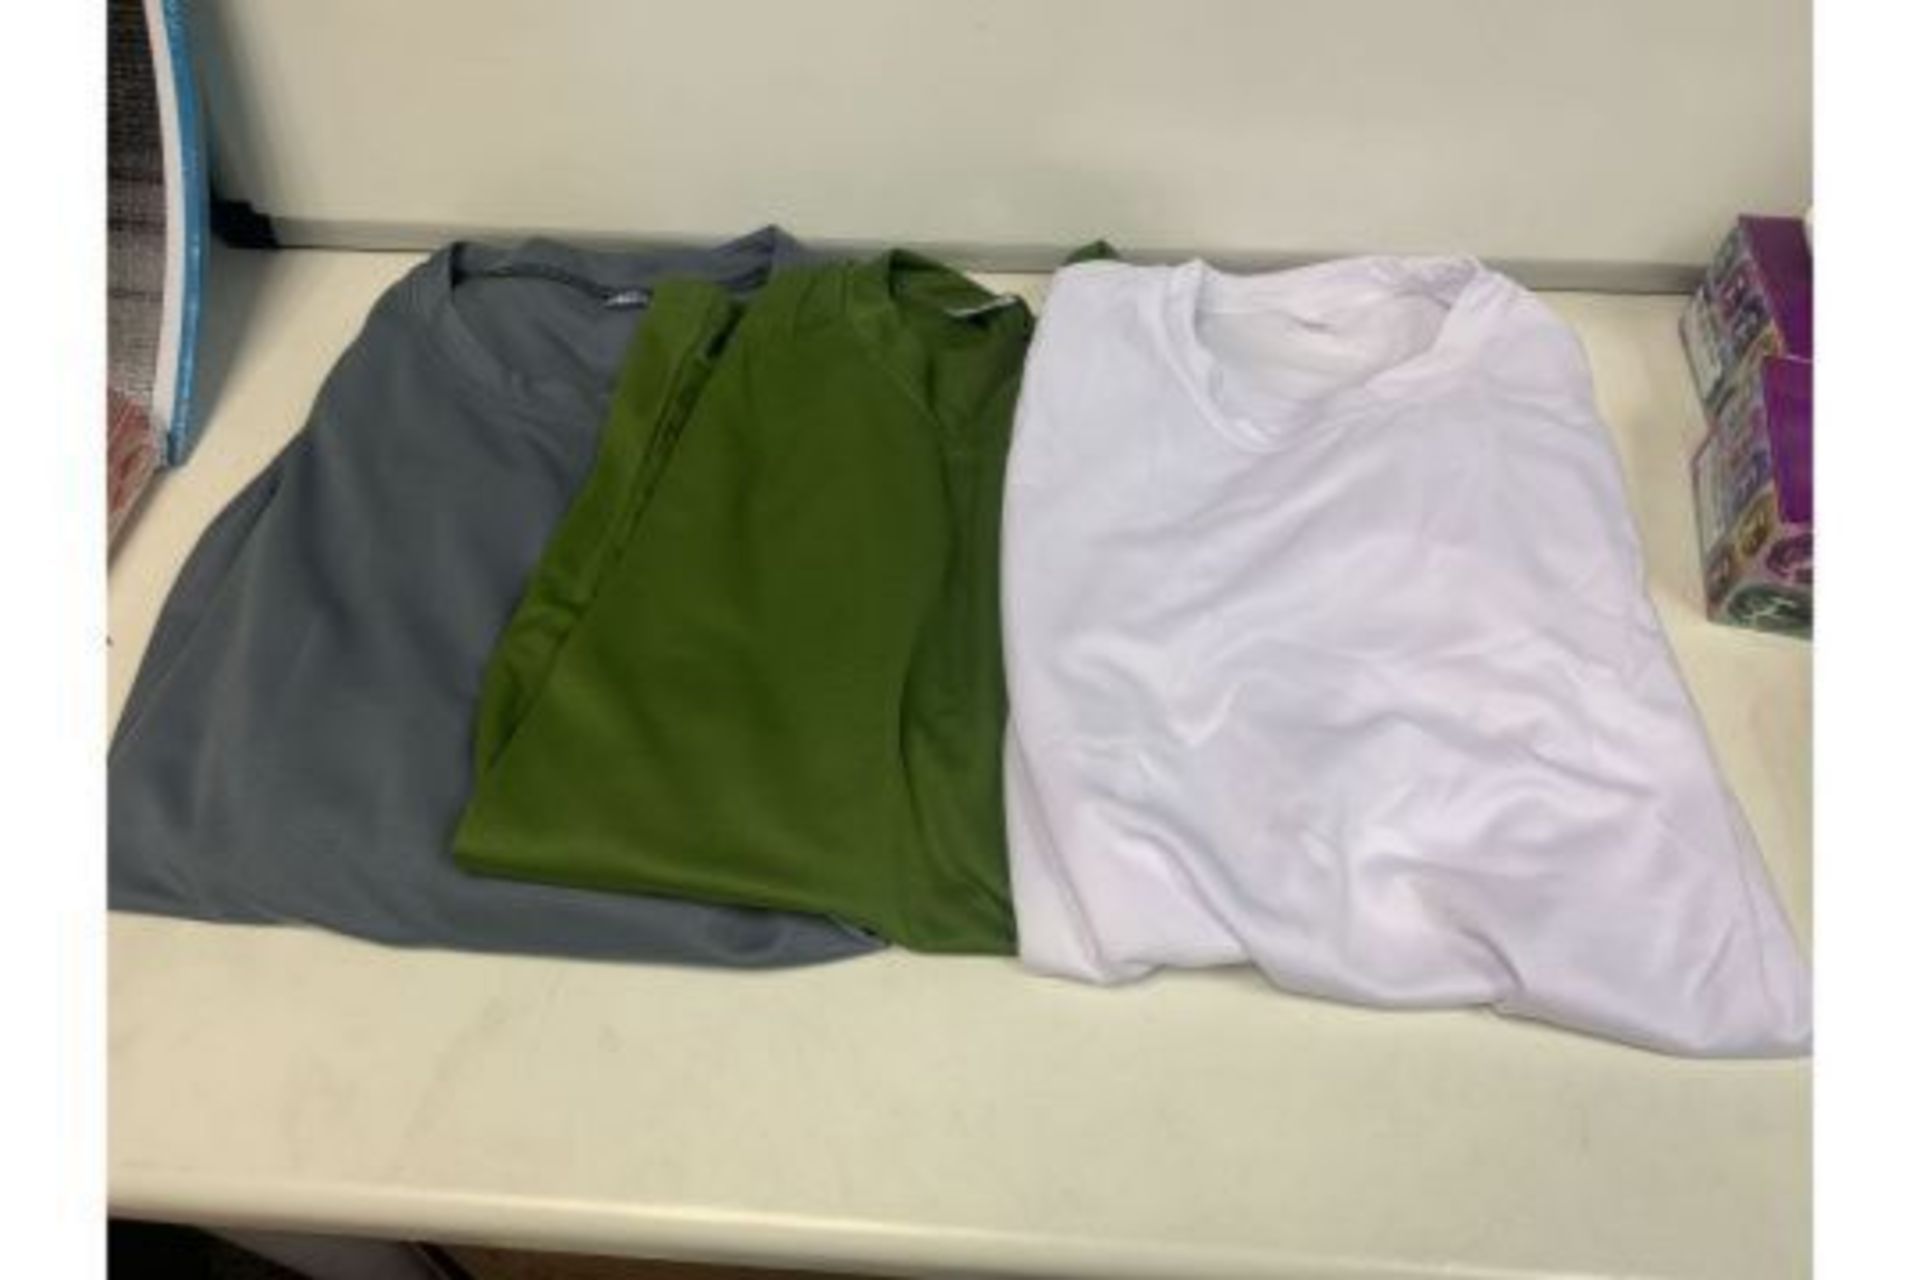 80 X BRAND NEW ASSORTED MESH SPORTS T SHIRTS IN VARIOUS COLOURS AND SIZES R17